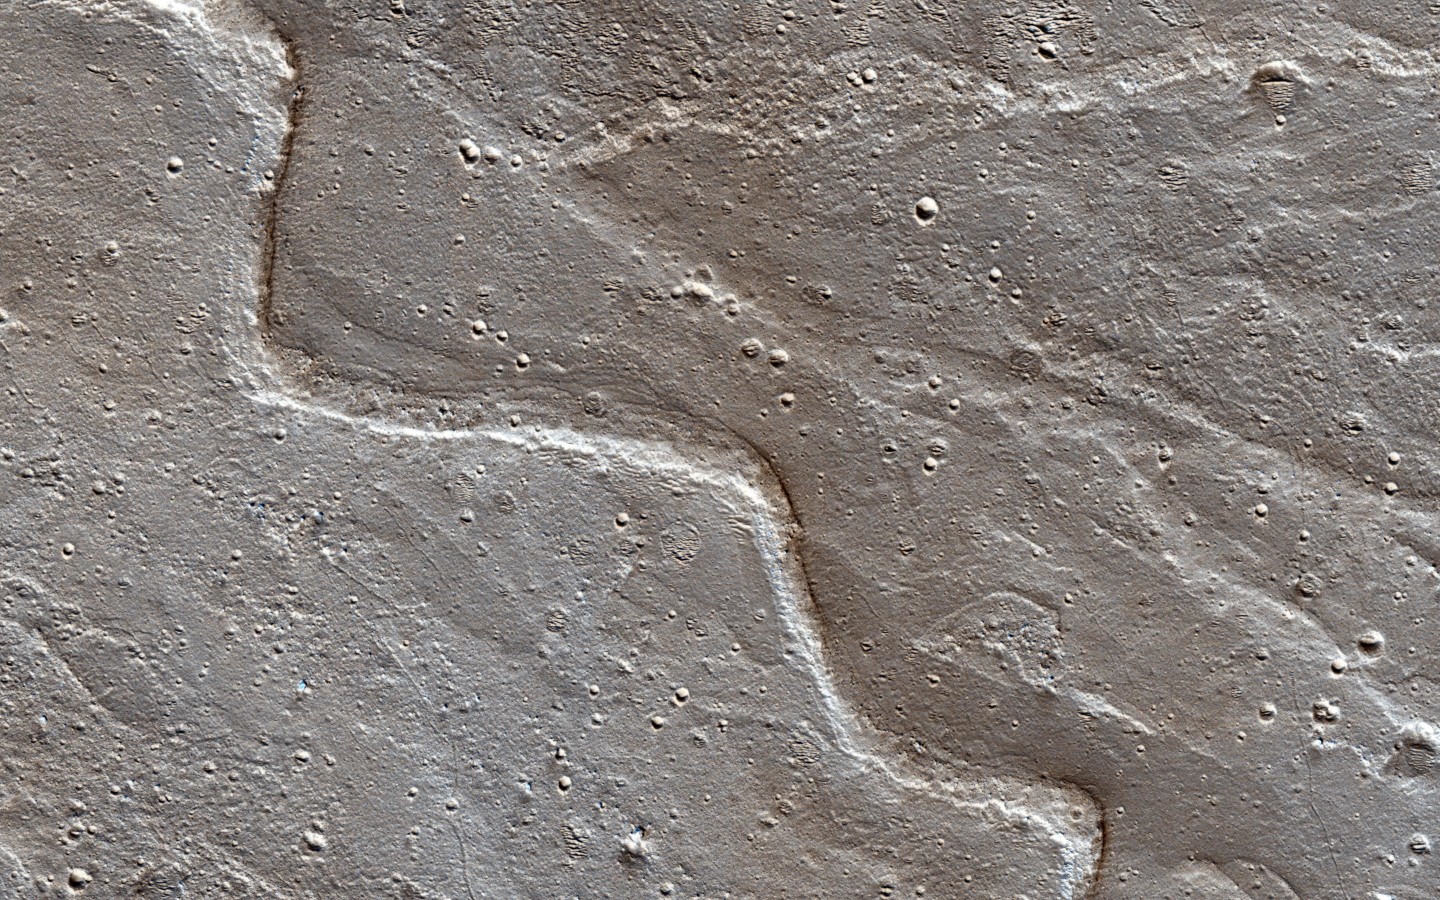 The sinuous ridges on the Orson Welles bajada mark the paths water took as it flowed into this crater. The sinuosity of the ridges tells us something about the speed of the water flow. Fast-moving flows tend to be straighter than slow-moving. (NASA/JPL-Caltech/Univ. of Arizona)